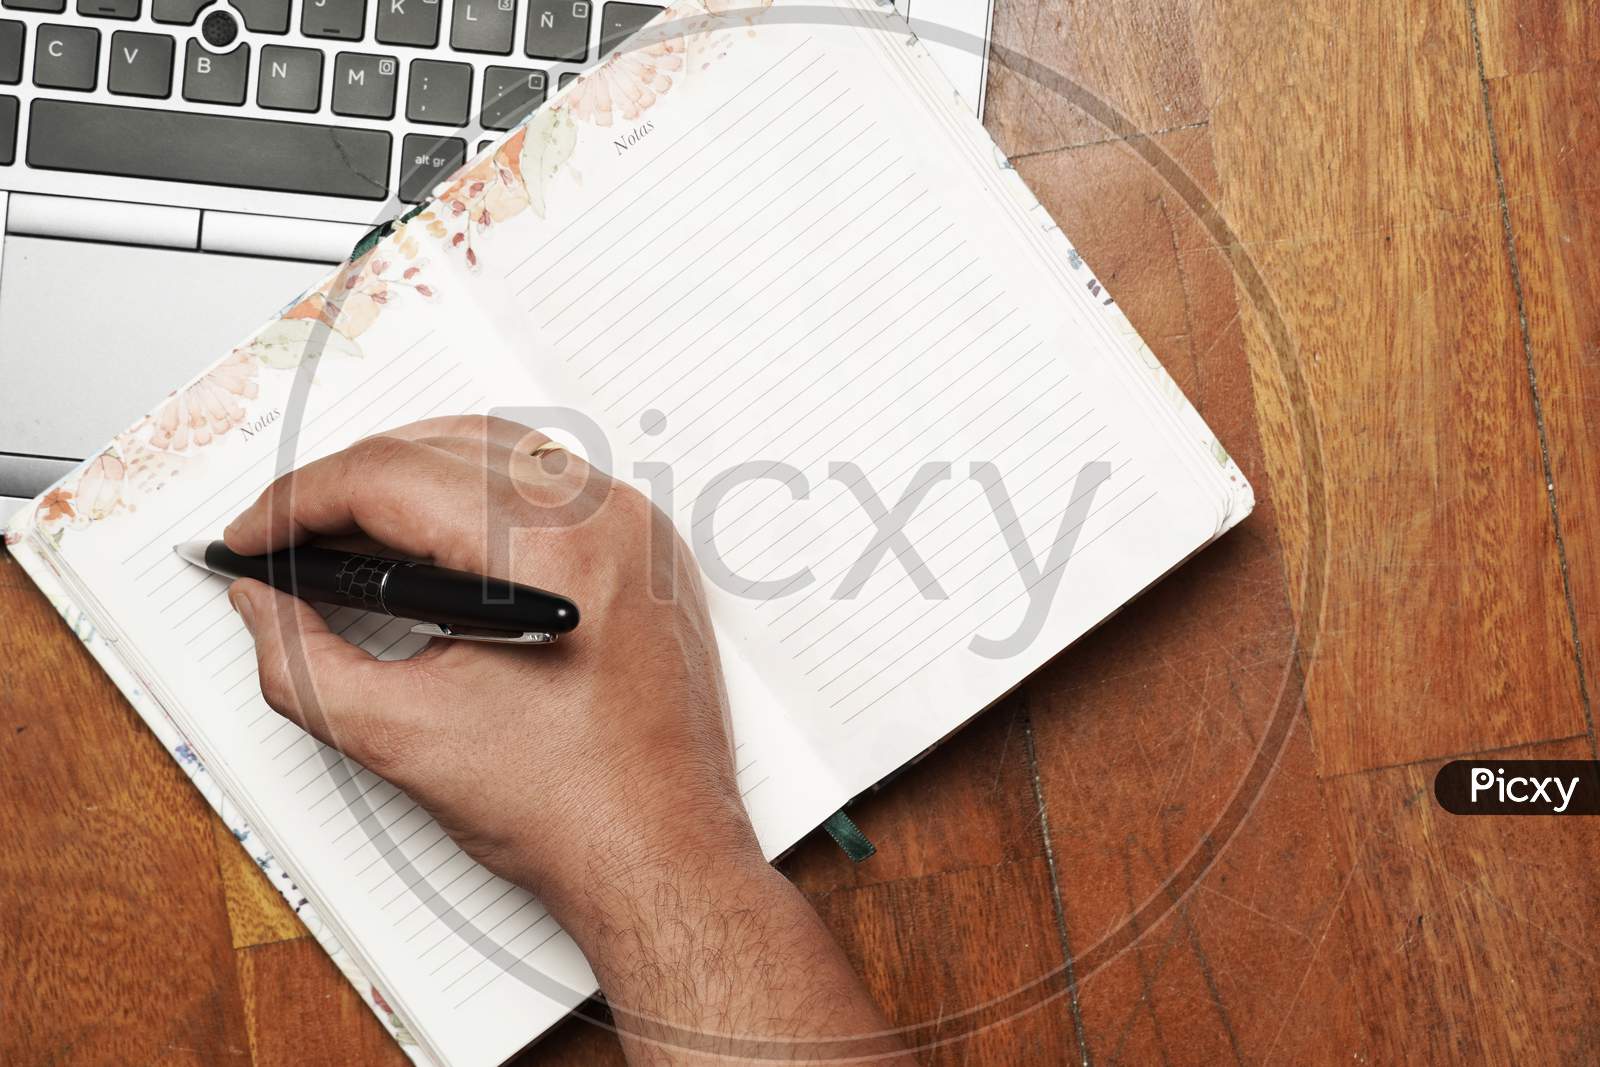 Work Table With Man'S Hand Writing On Agenda With Laptop. Flat Lay. Flat Design